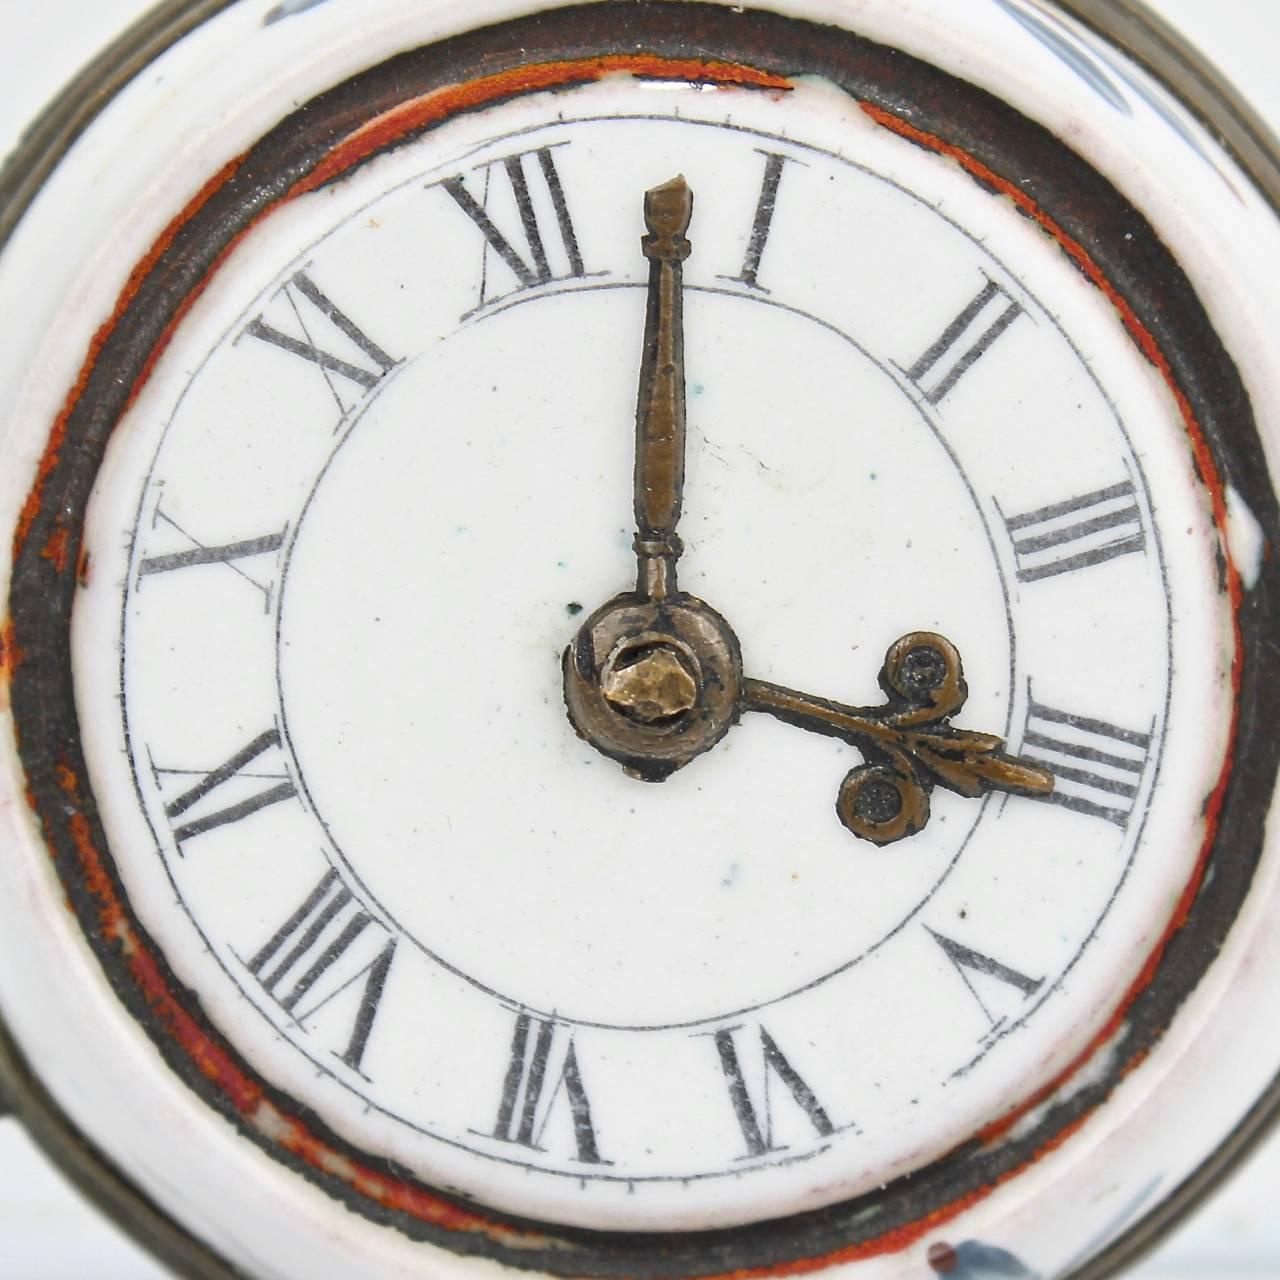 A rare 18th century English Battersea or South Staffordshire enamel patch or snuff box in the form of a pocket watch. 

Interior retains an old Manheim retailer's sticker.

Measures: Diameter ca. 1 5/8 in.


